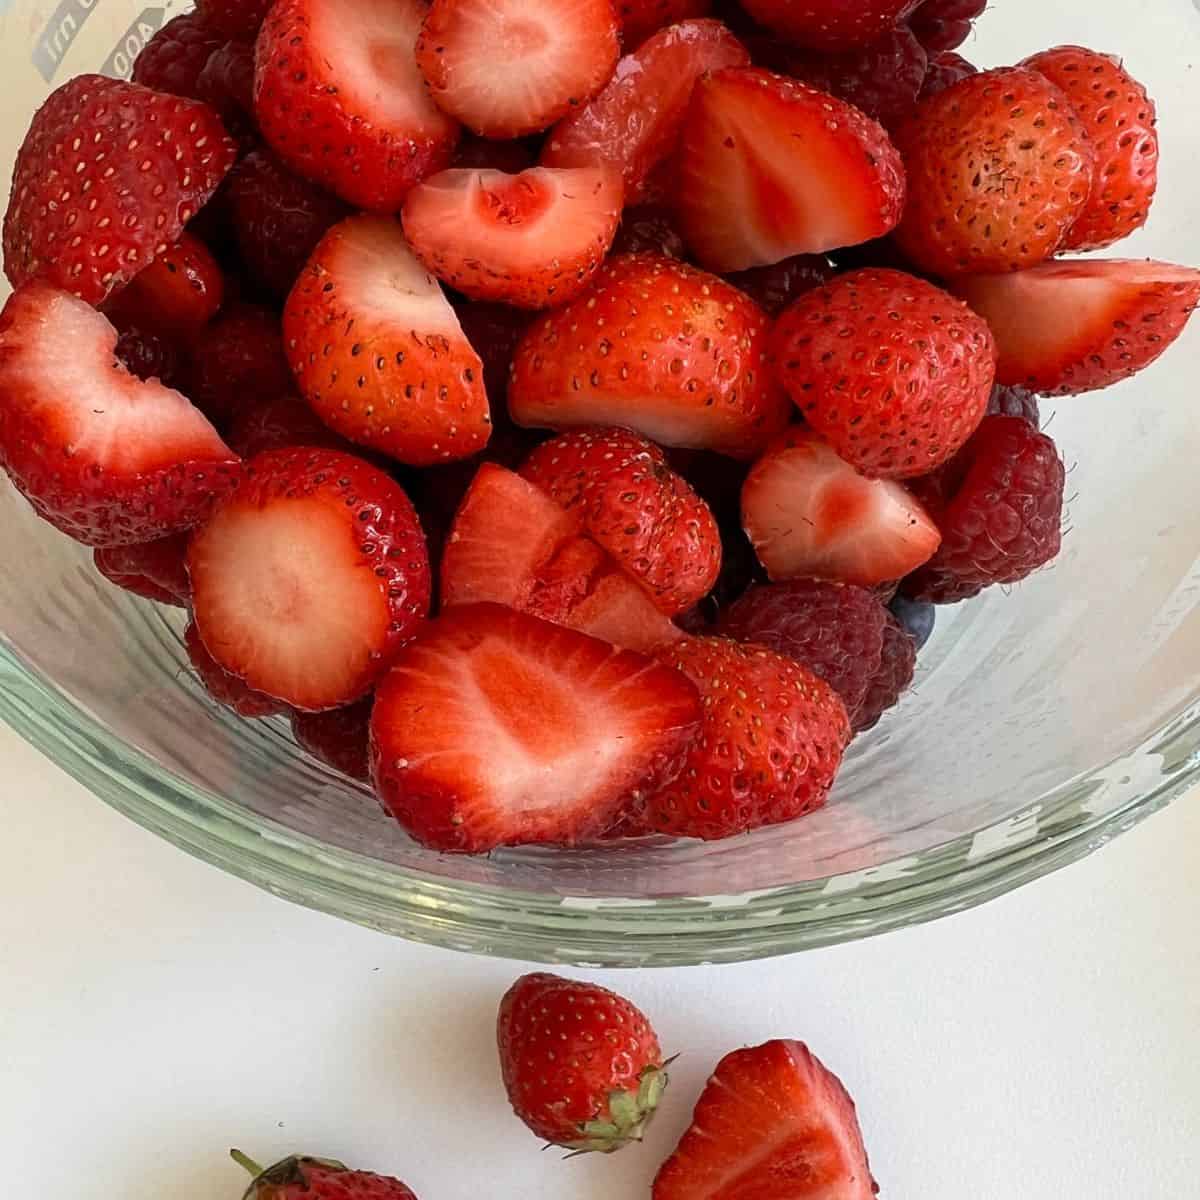 Sliced Strawberries in a bowl